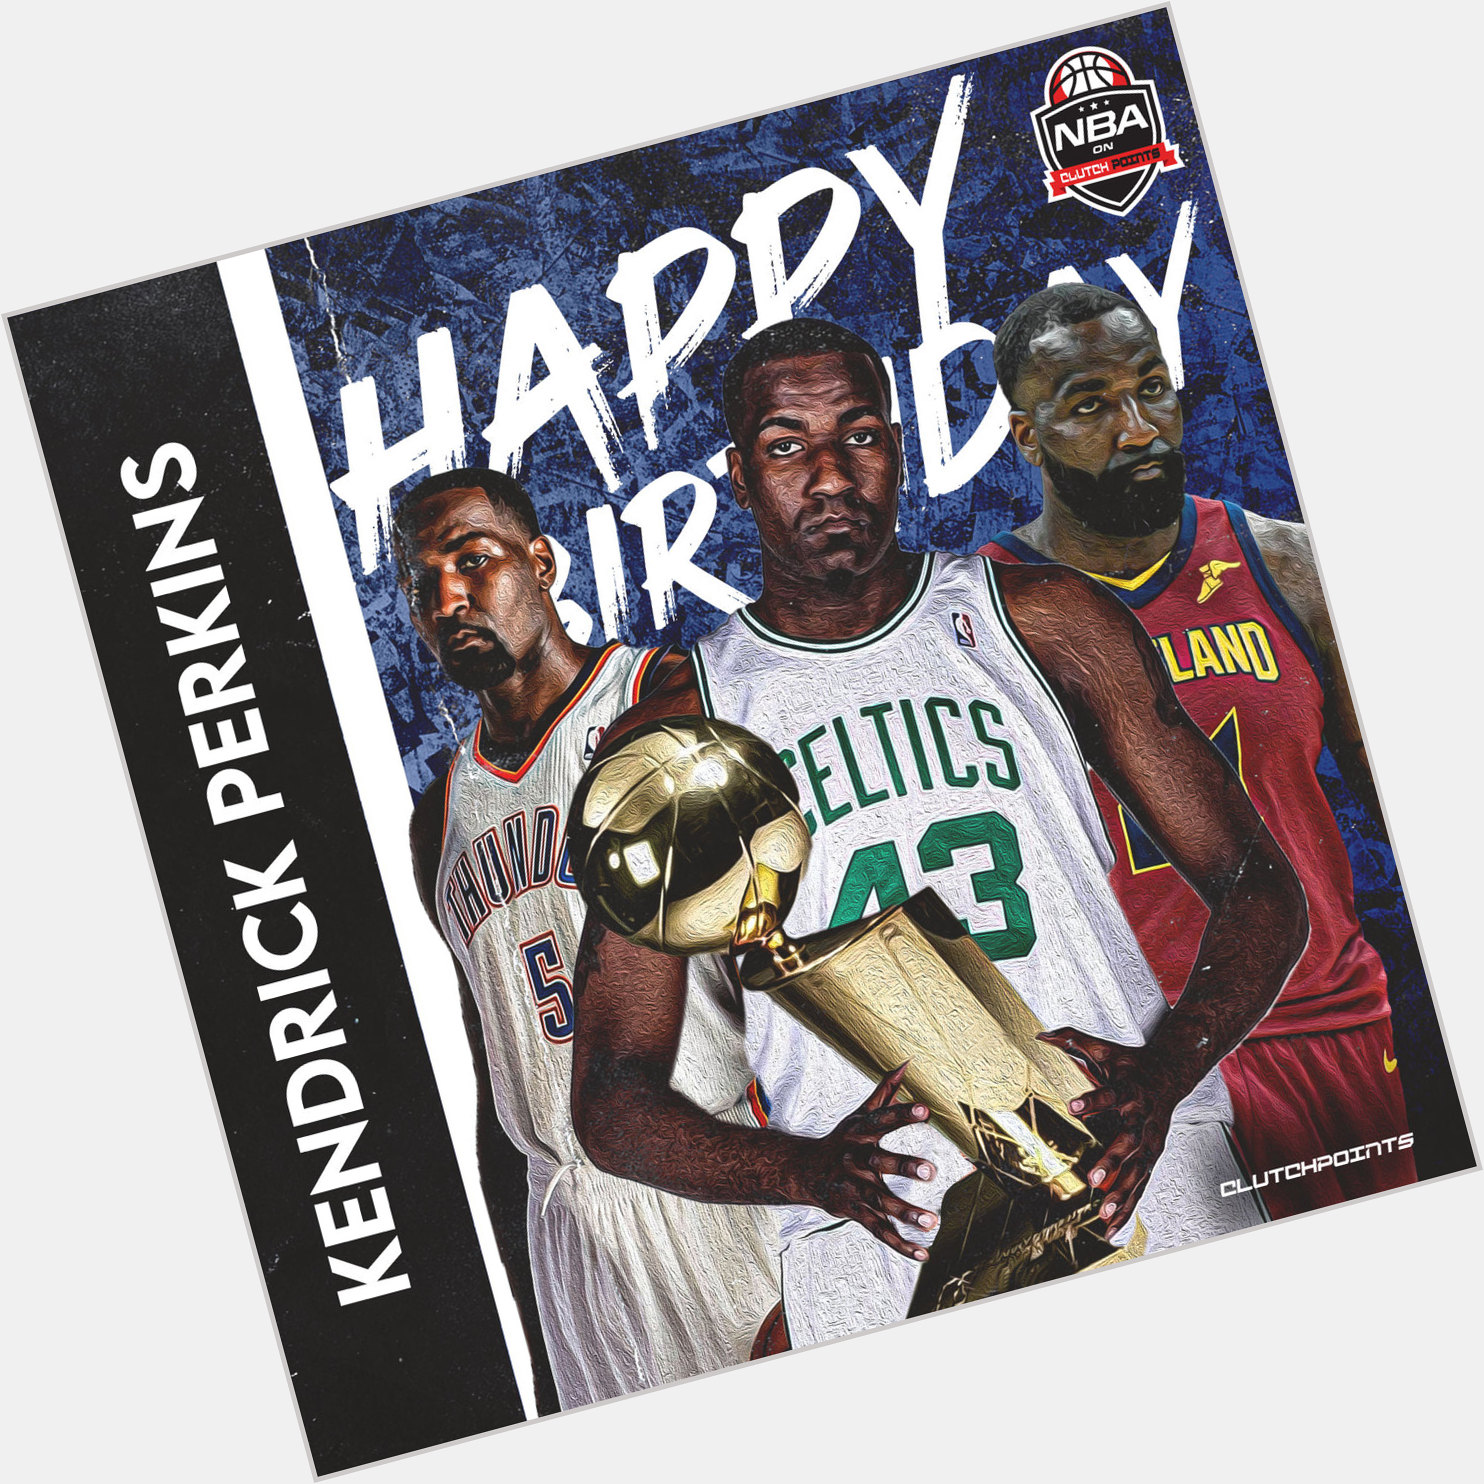 NBA on Clutchpoints fam, join us in wishing the former NBA Champ, Kendrick Perkins a happy 37th birthday! 